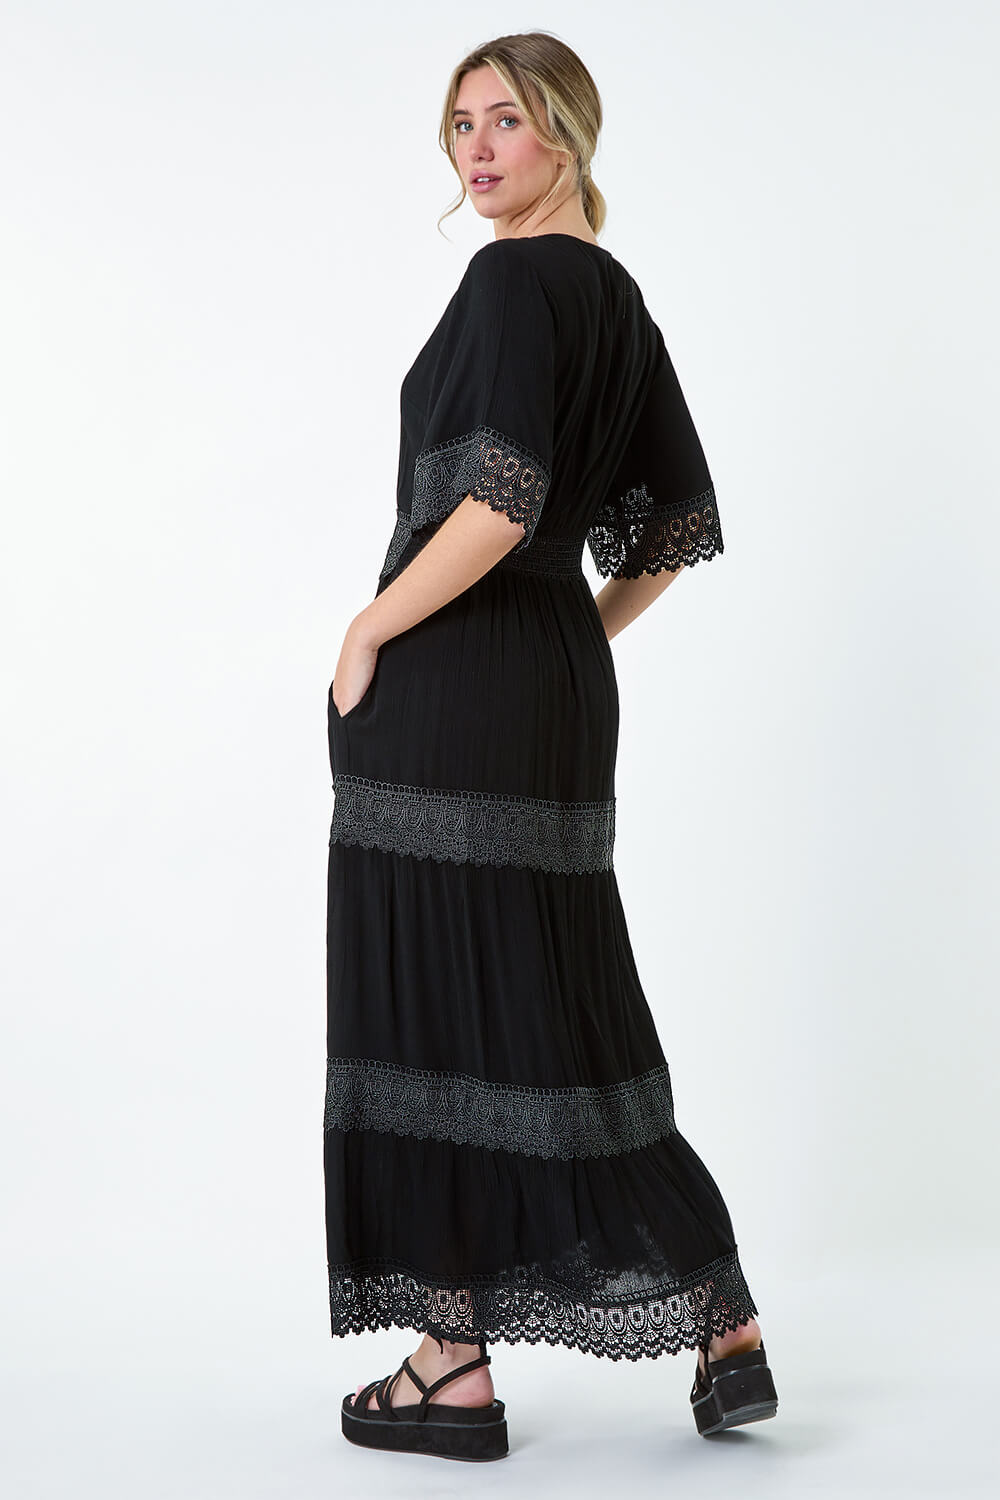 Black Tiered Lace Detail Maxi Dress, Image 2 of 4